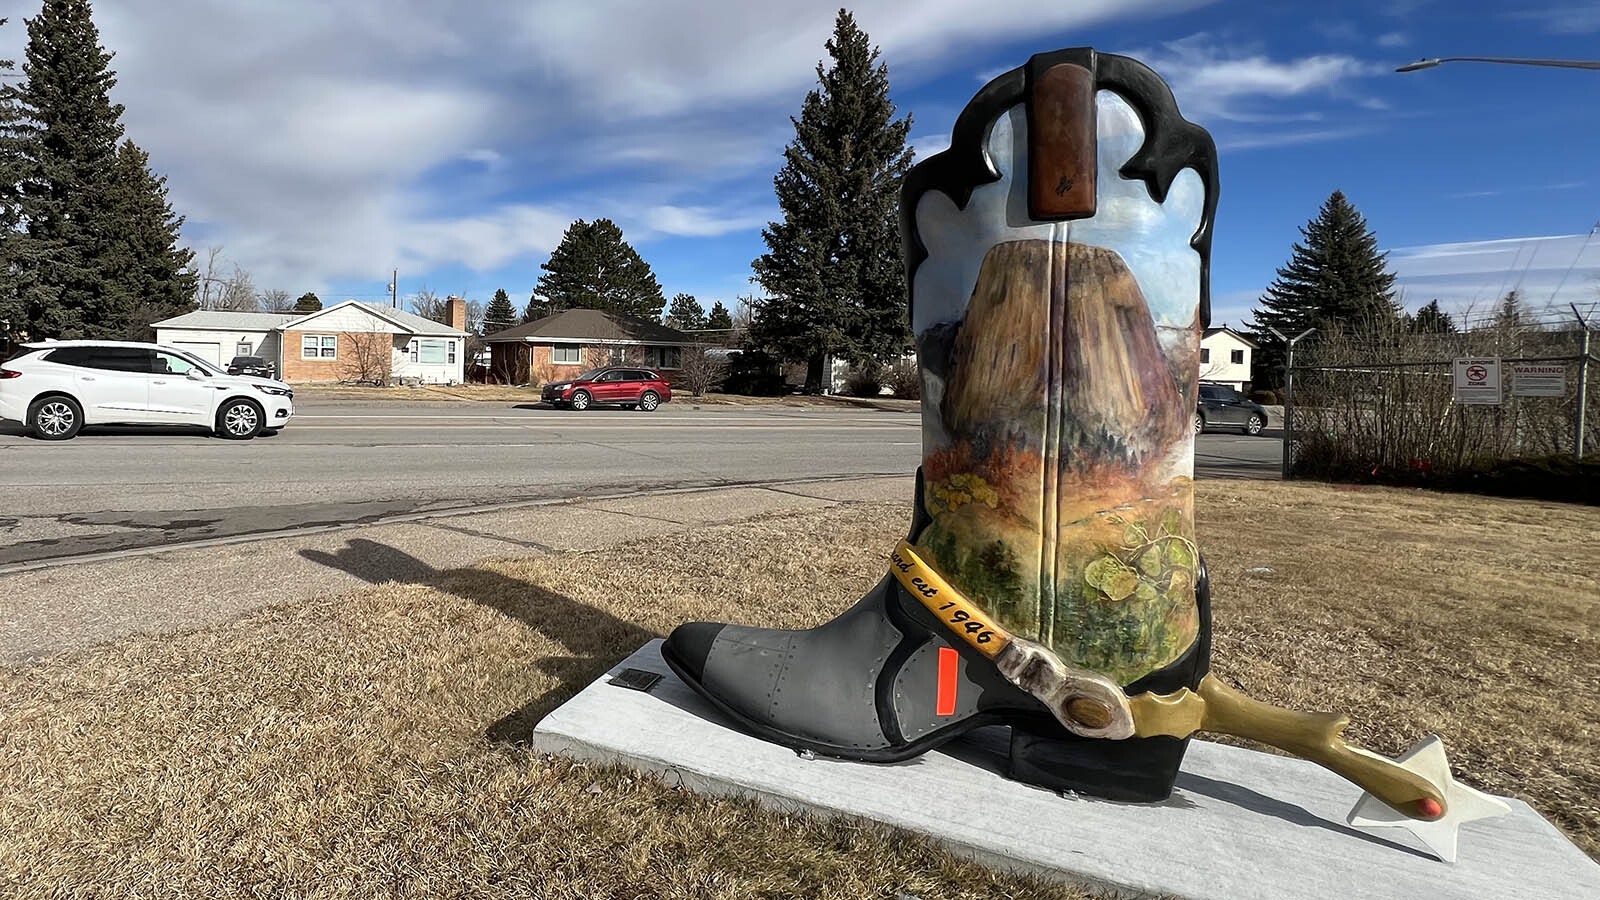 This new Big Boot at the entrance to the Wyoming National Guard honors the Guard's service to Wyoming.